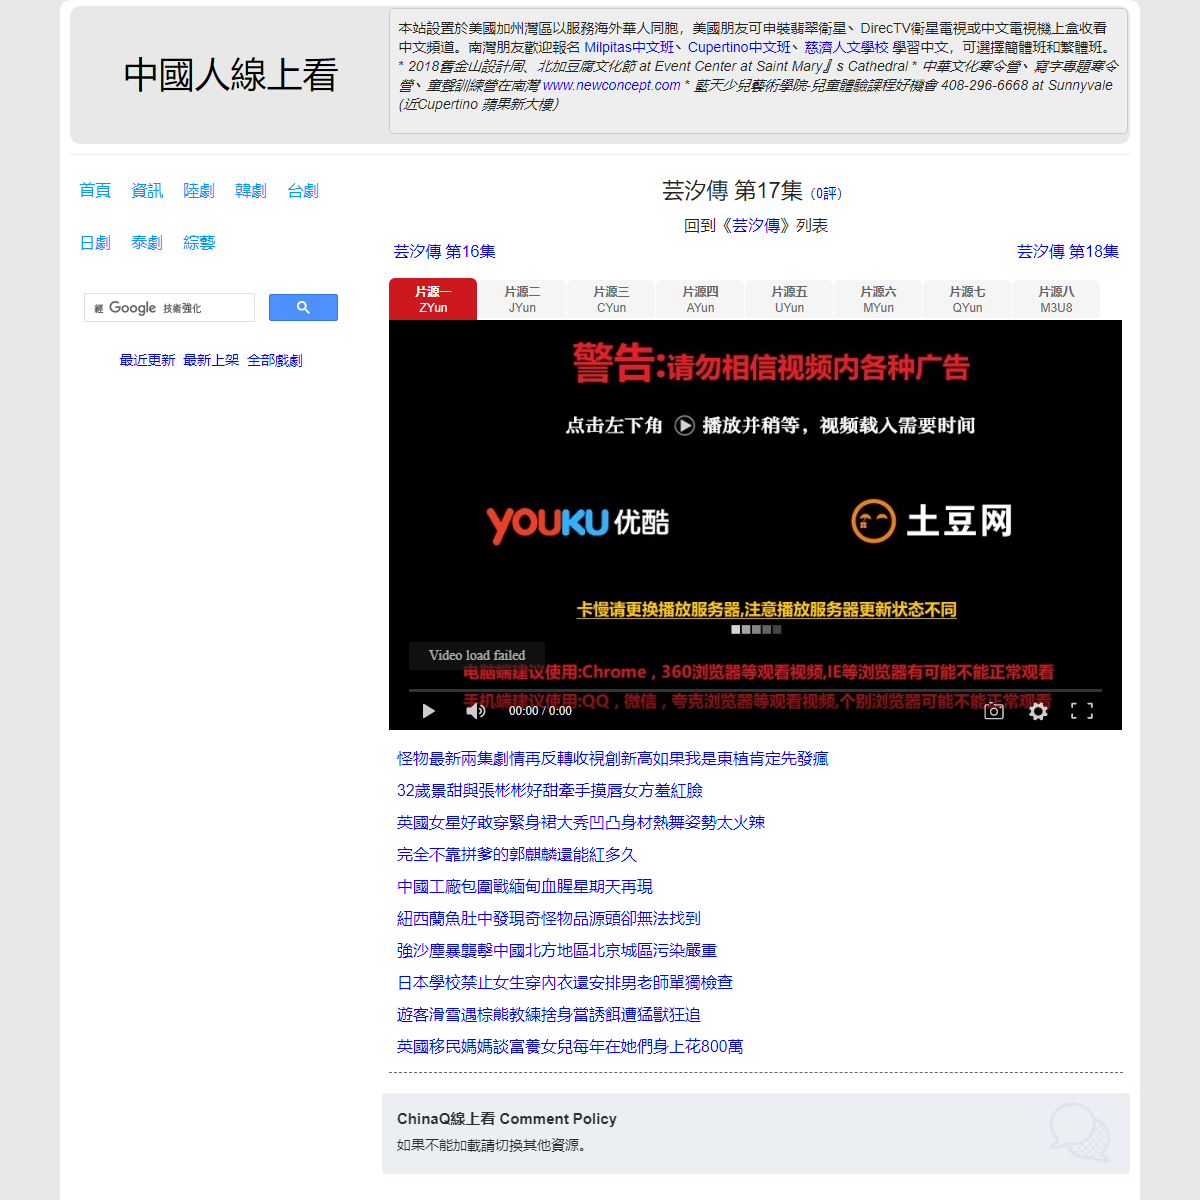 A complete backup of https://chinaq.tv/cn180625/17.html